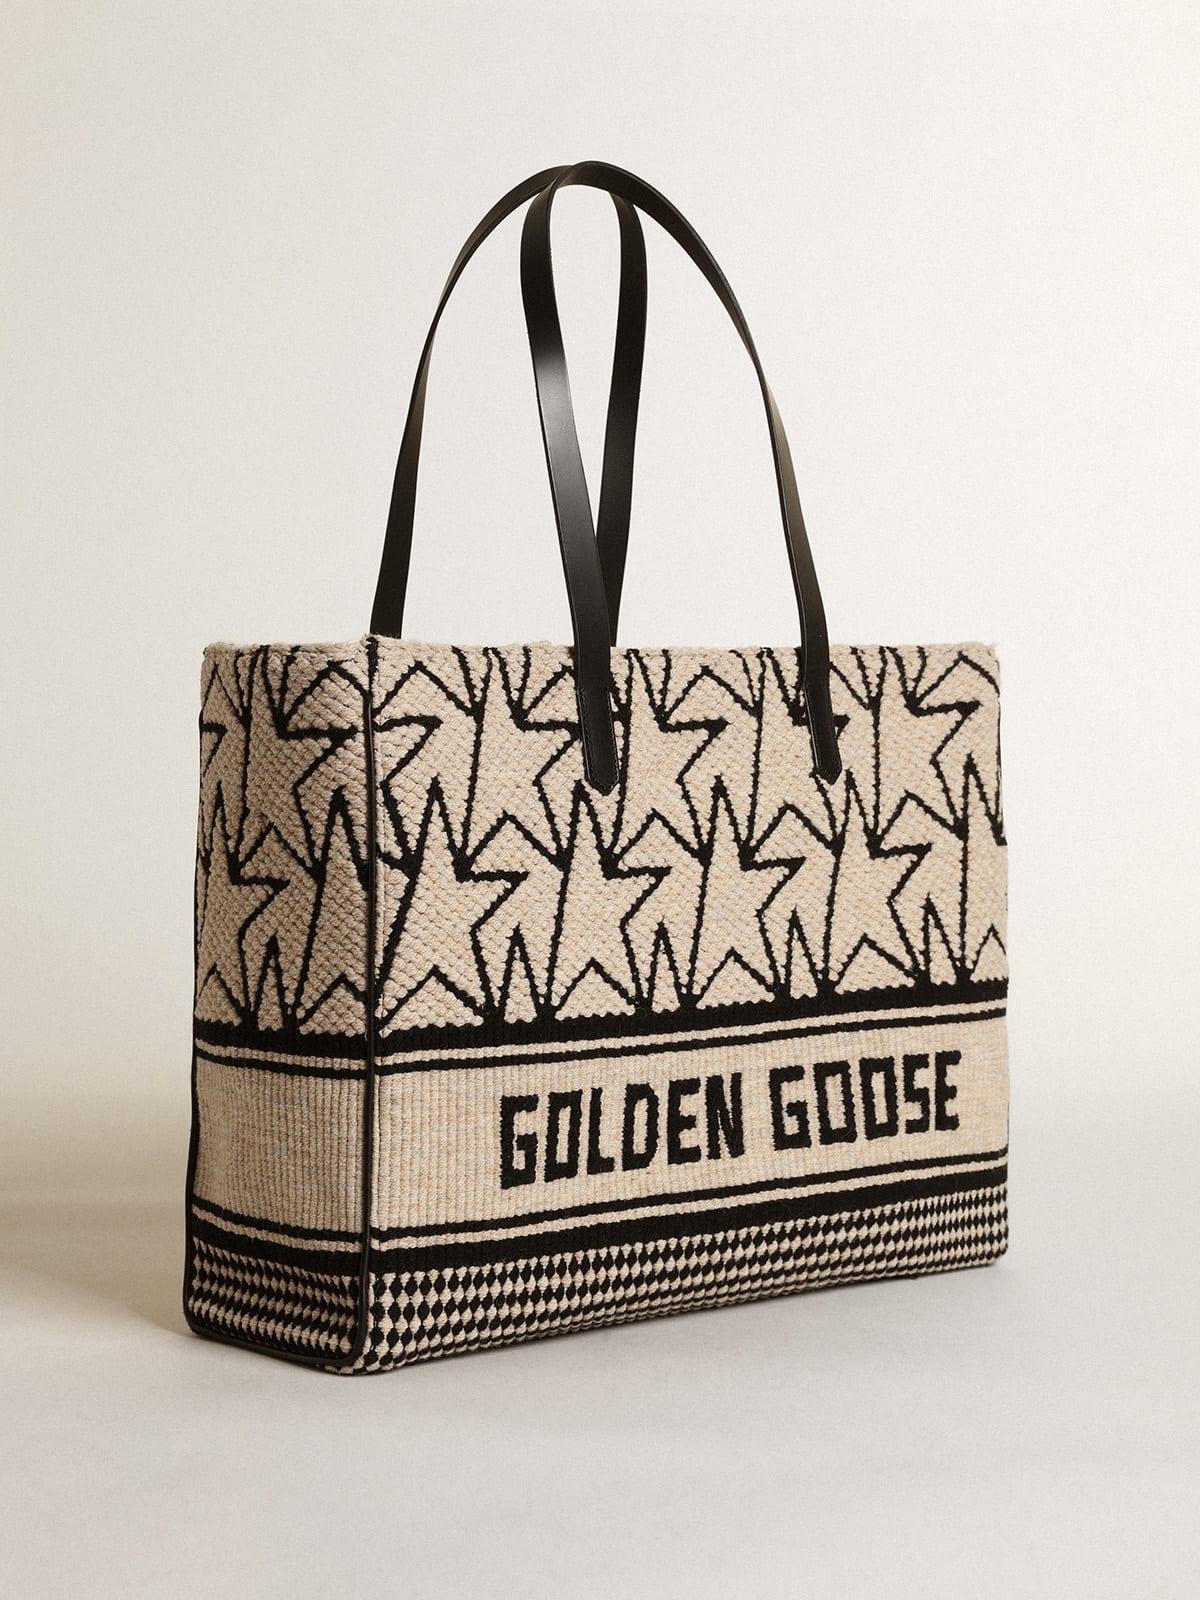 Golden Goose - East-West California Bag in milk-white jacquard wool with contrasting black monograms and Golden Goose lettering in 